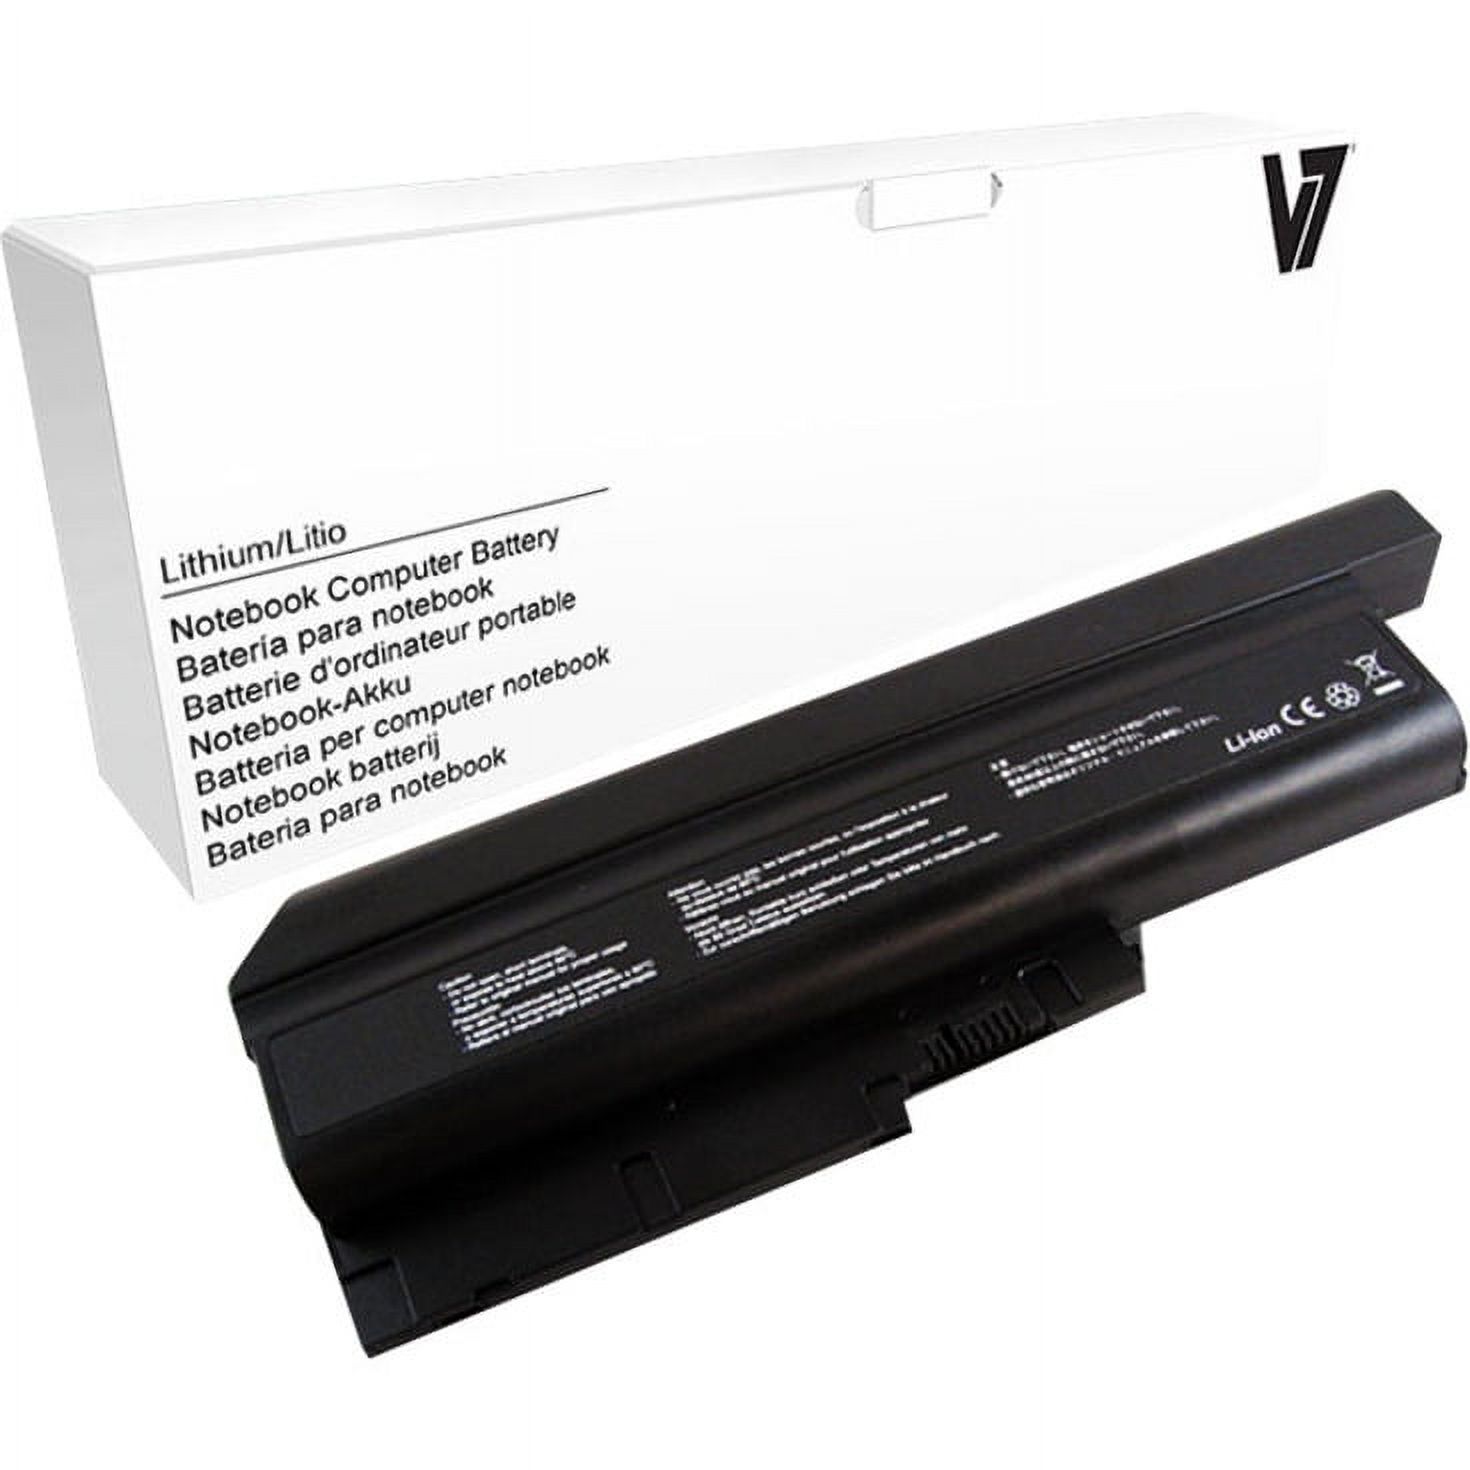 V7 Replacement Battery LENOVO IBM THINKPAD T60 R60 Z60M SERIES OEM# 42T4511 9 CELL - image 2 of 2